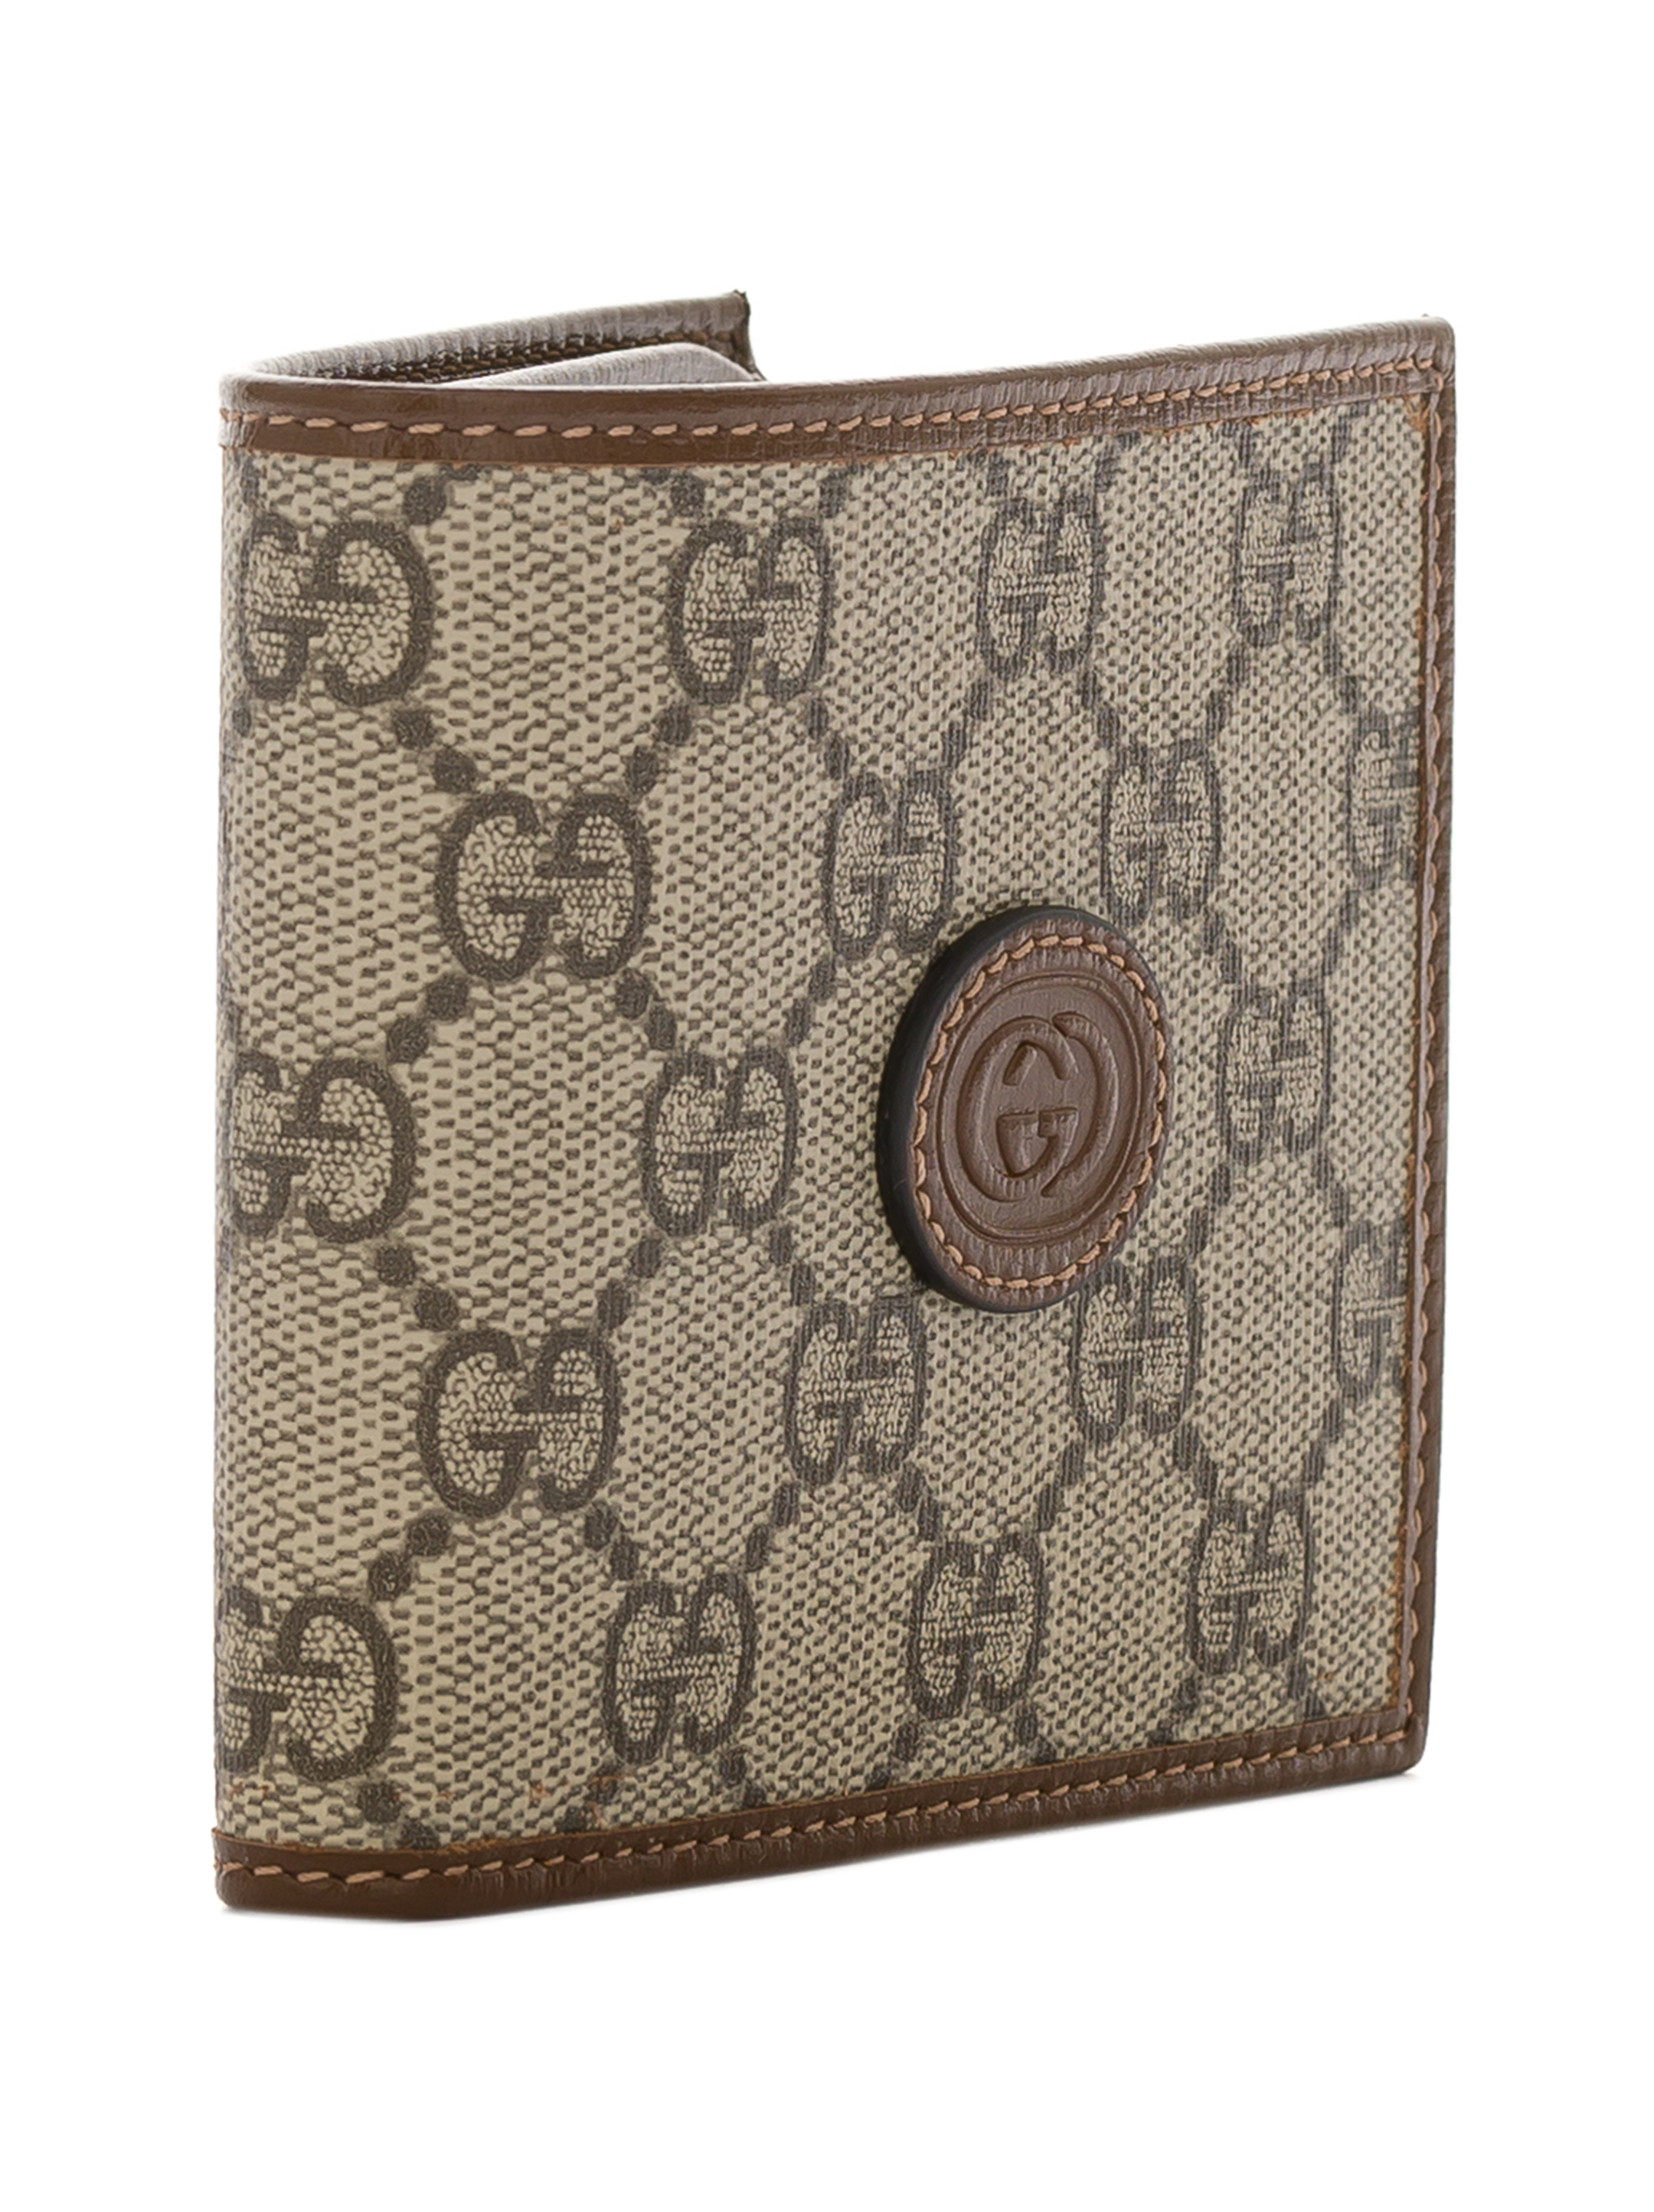 Gucci GG Supreme logo wallet - buy for 258000 KZT in official Viled online store, art. 671652 92TCG.8563_U_231